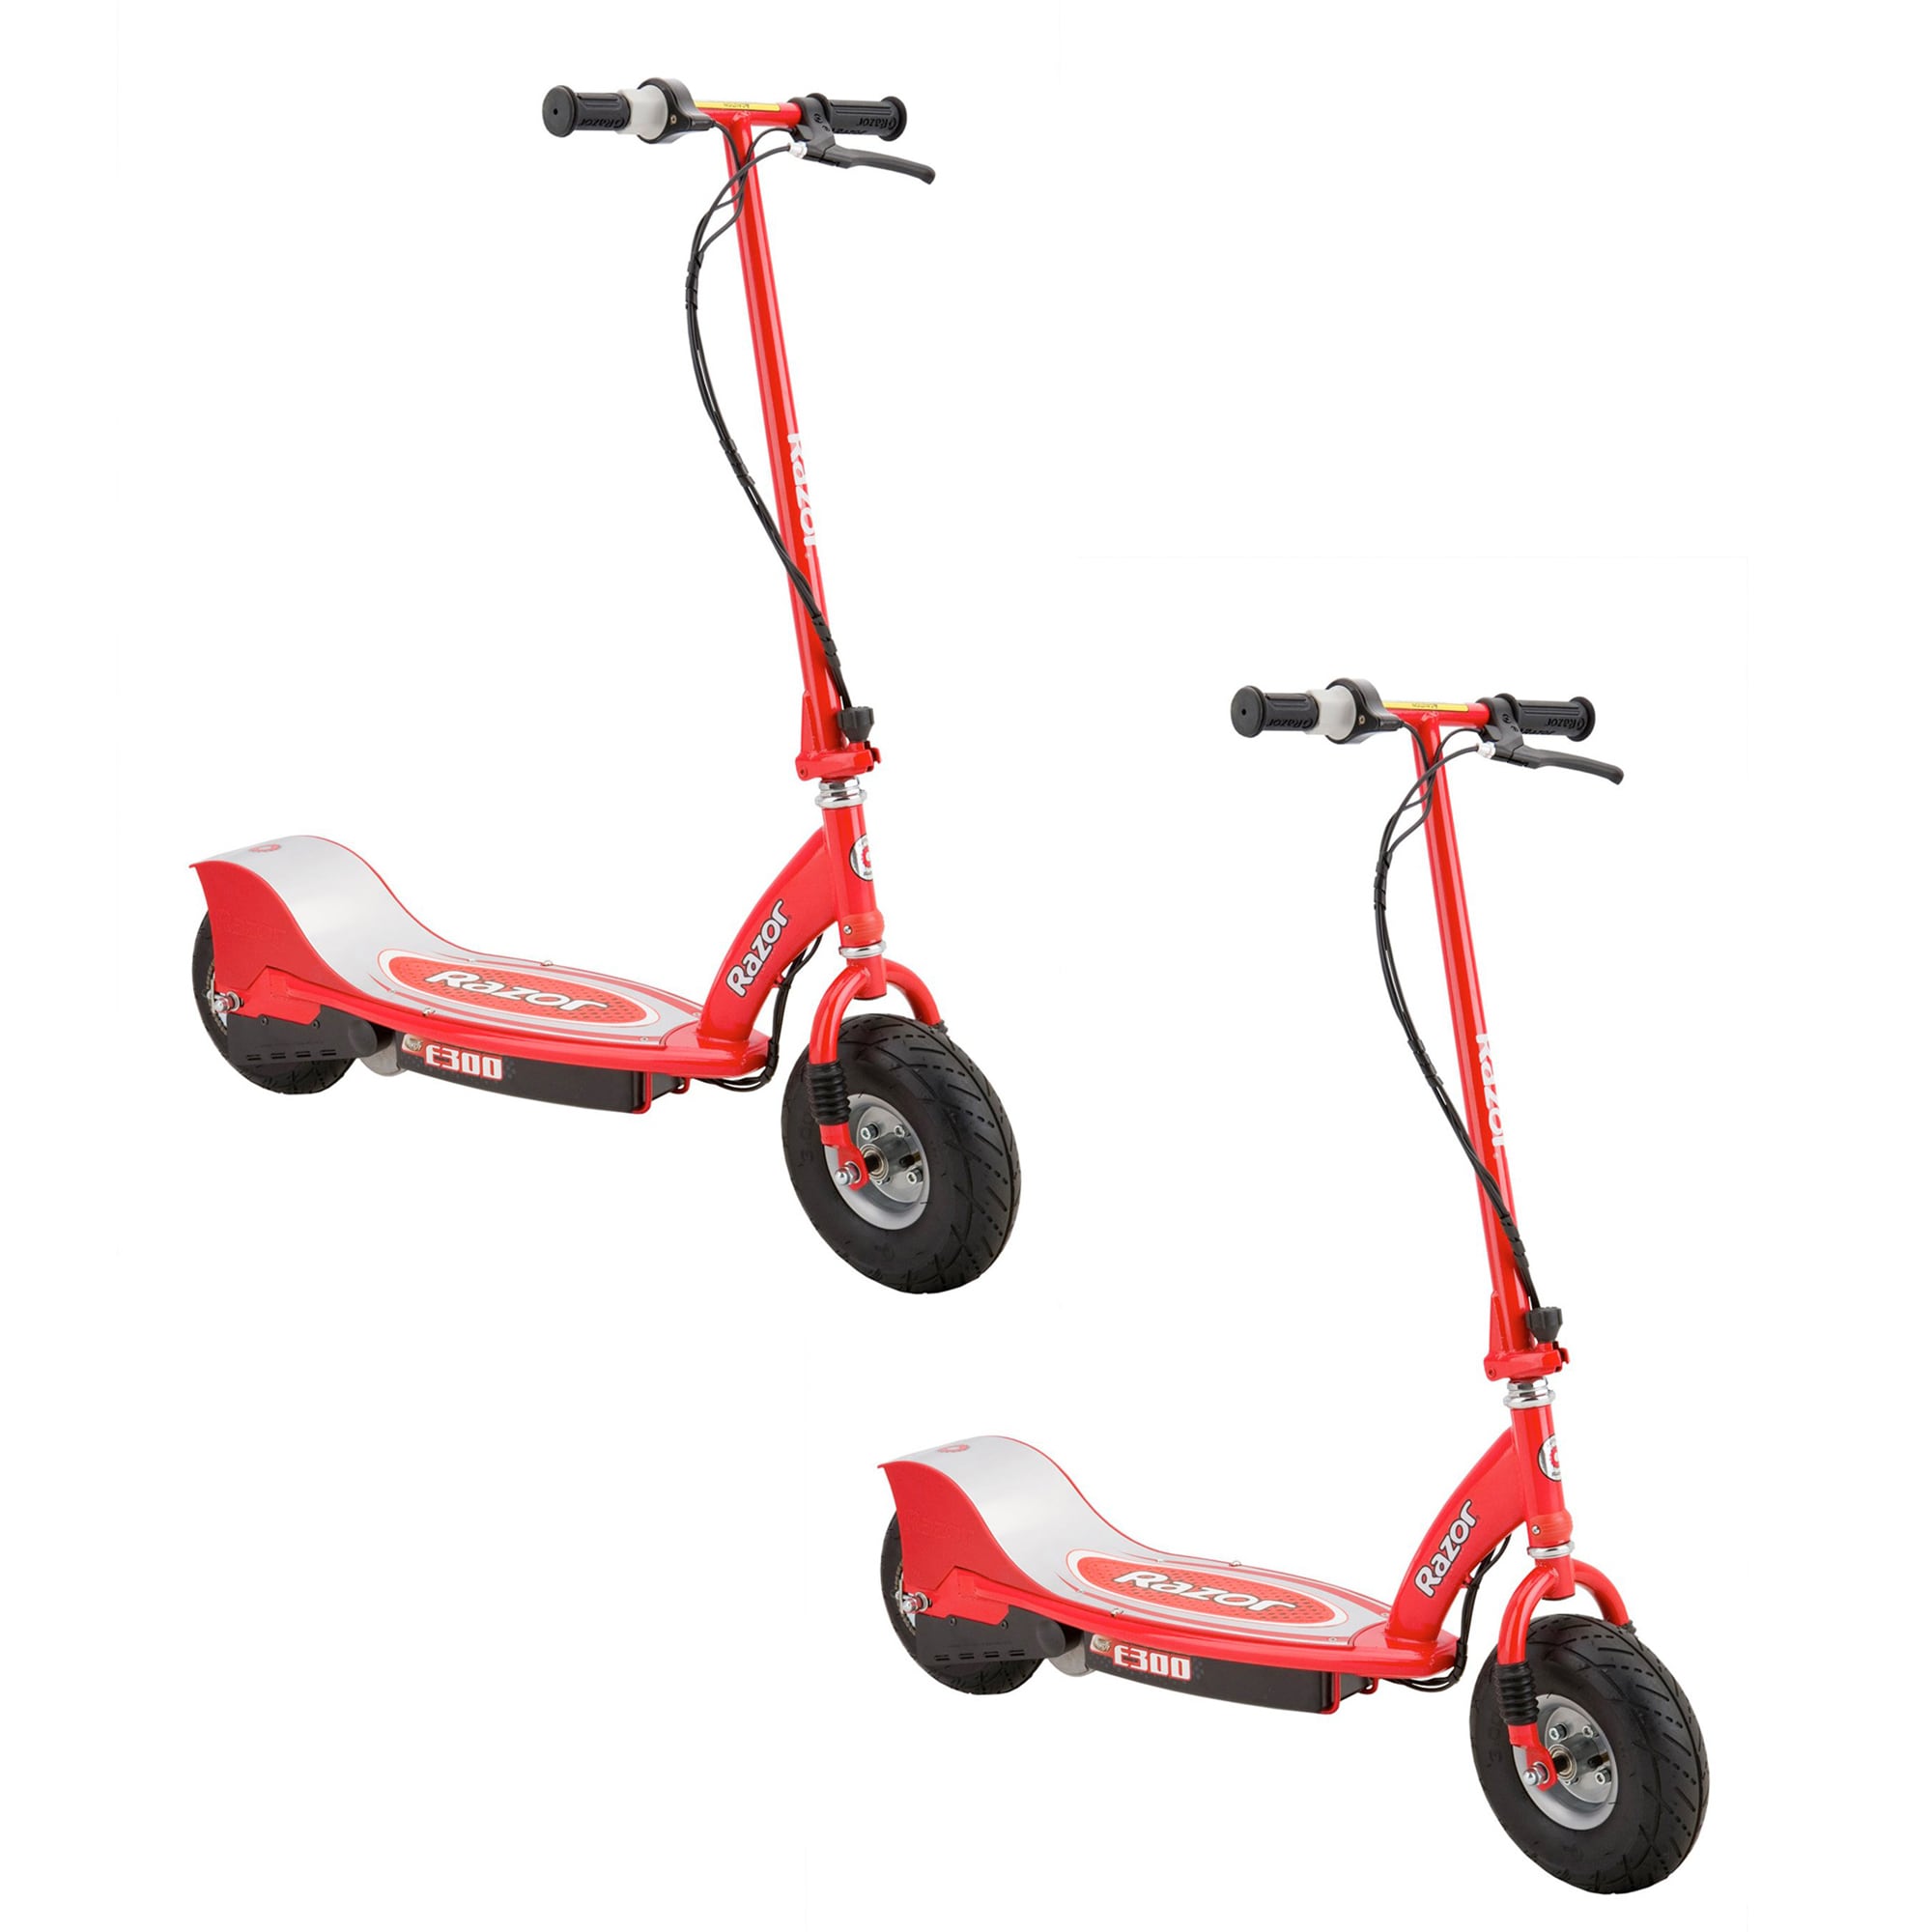 porcelæn Outlaw gen Razor E300 Adult Ride-on 24v High-torque Electric Powered Scooter, Red (2  Pack) in the Scooters department at Lowes.com